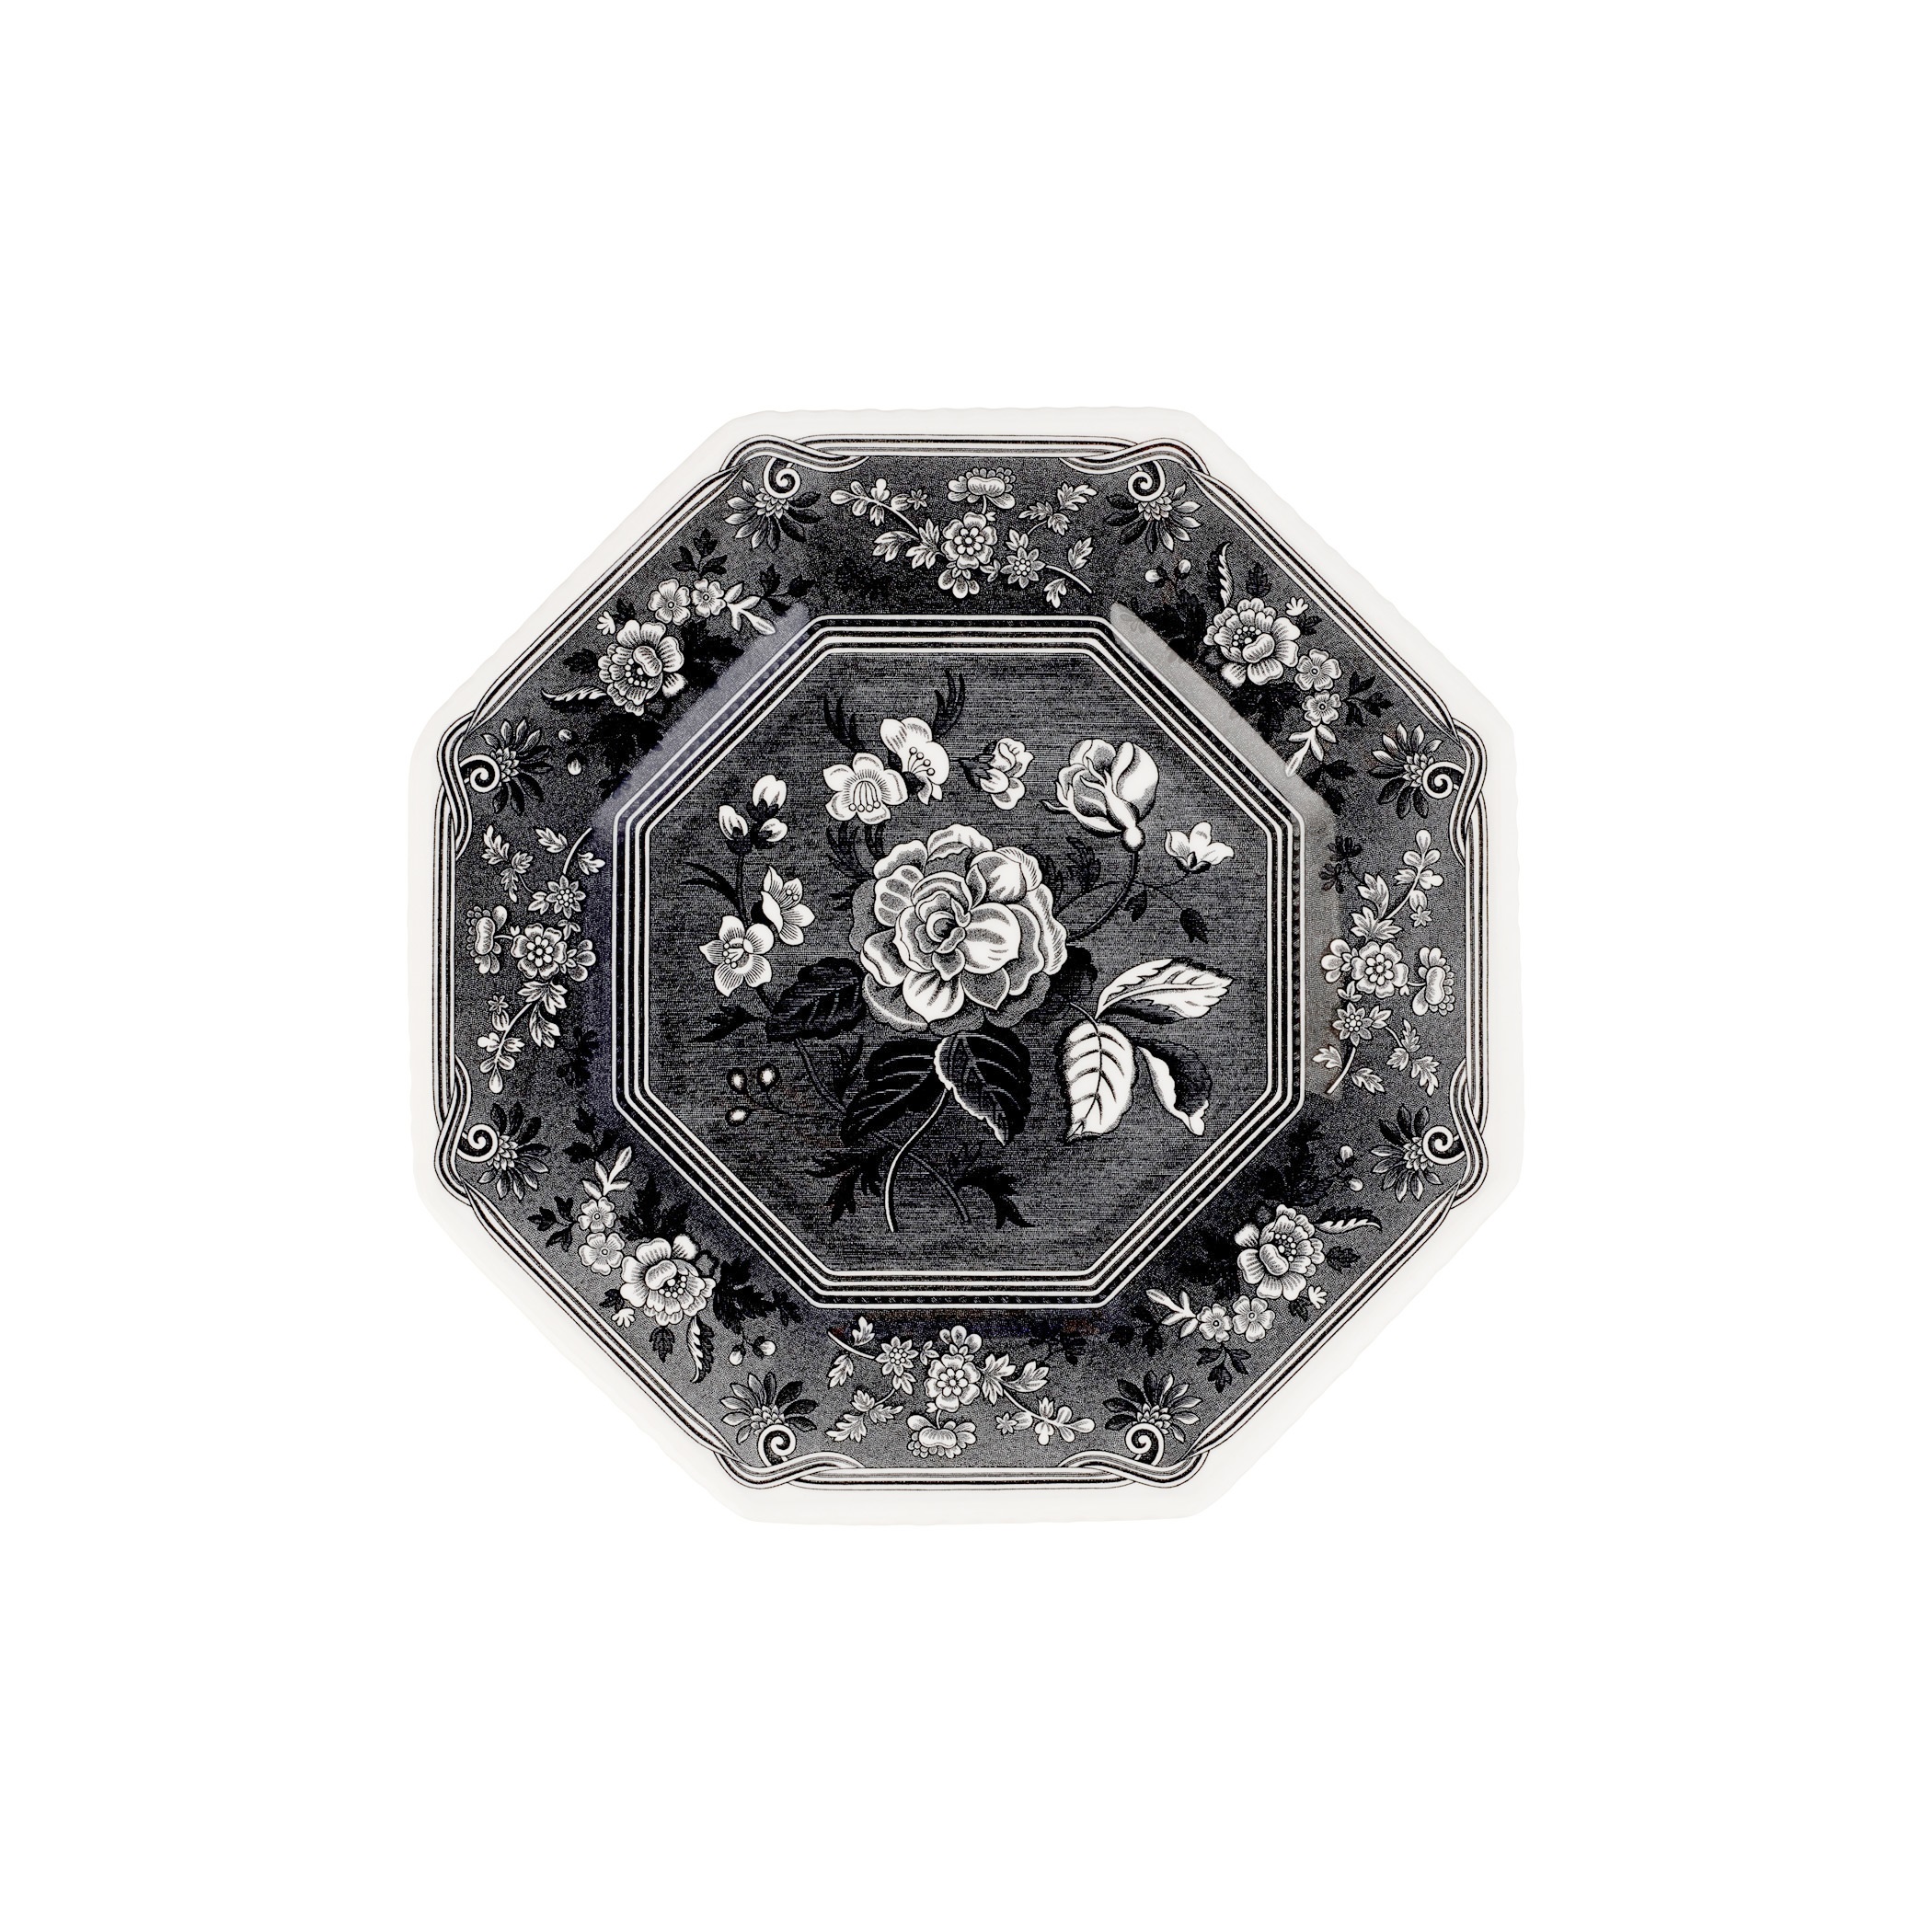 Heritage Octagonal Plate 9.5 Inch, Botanical image number null